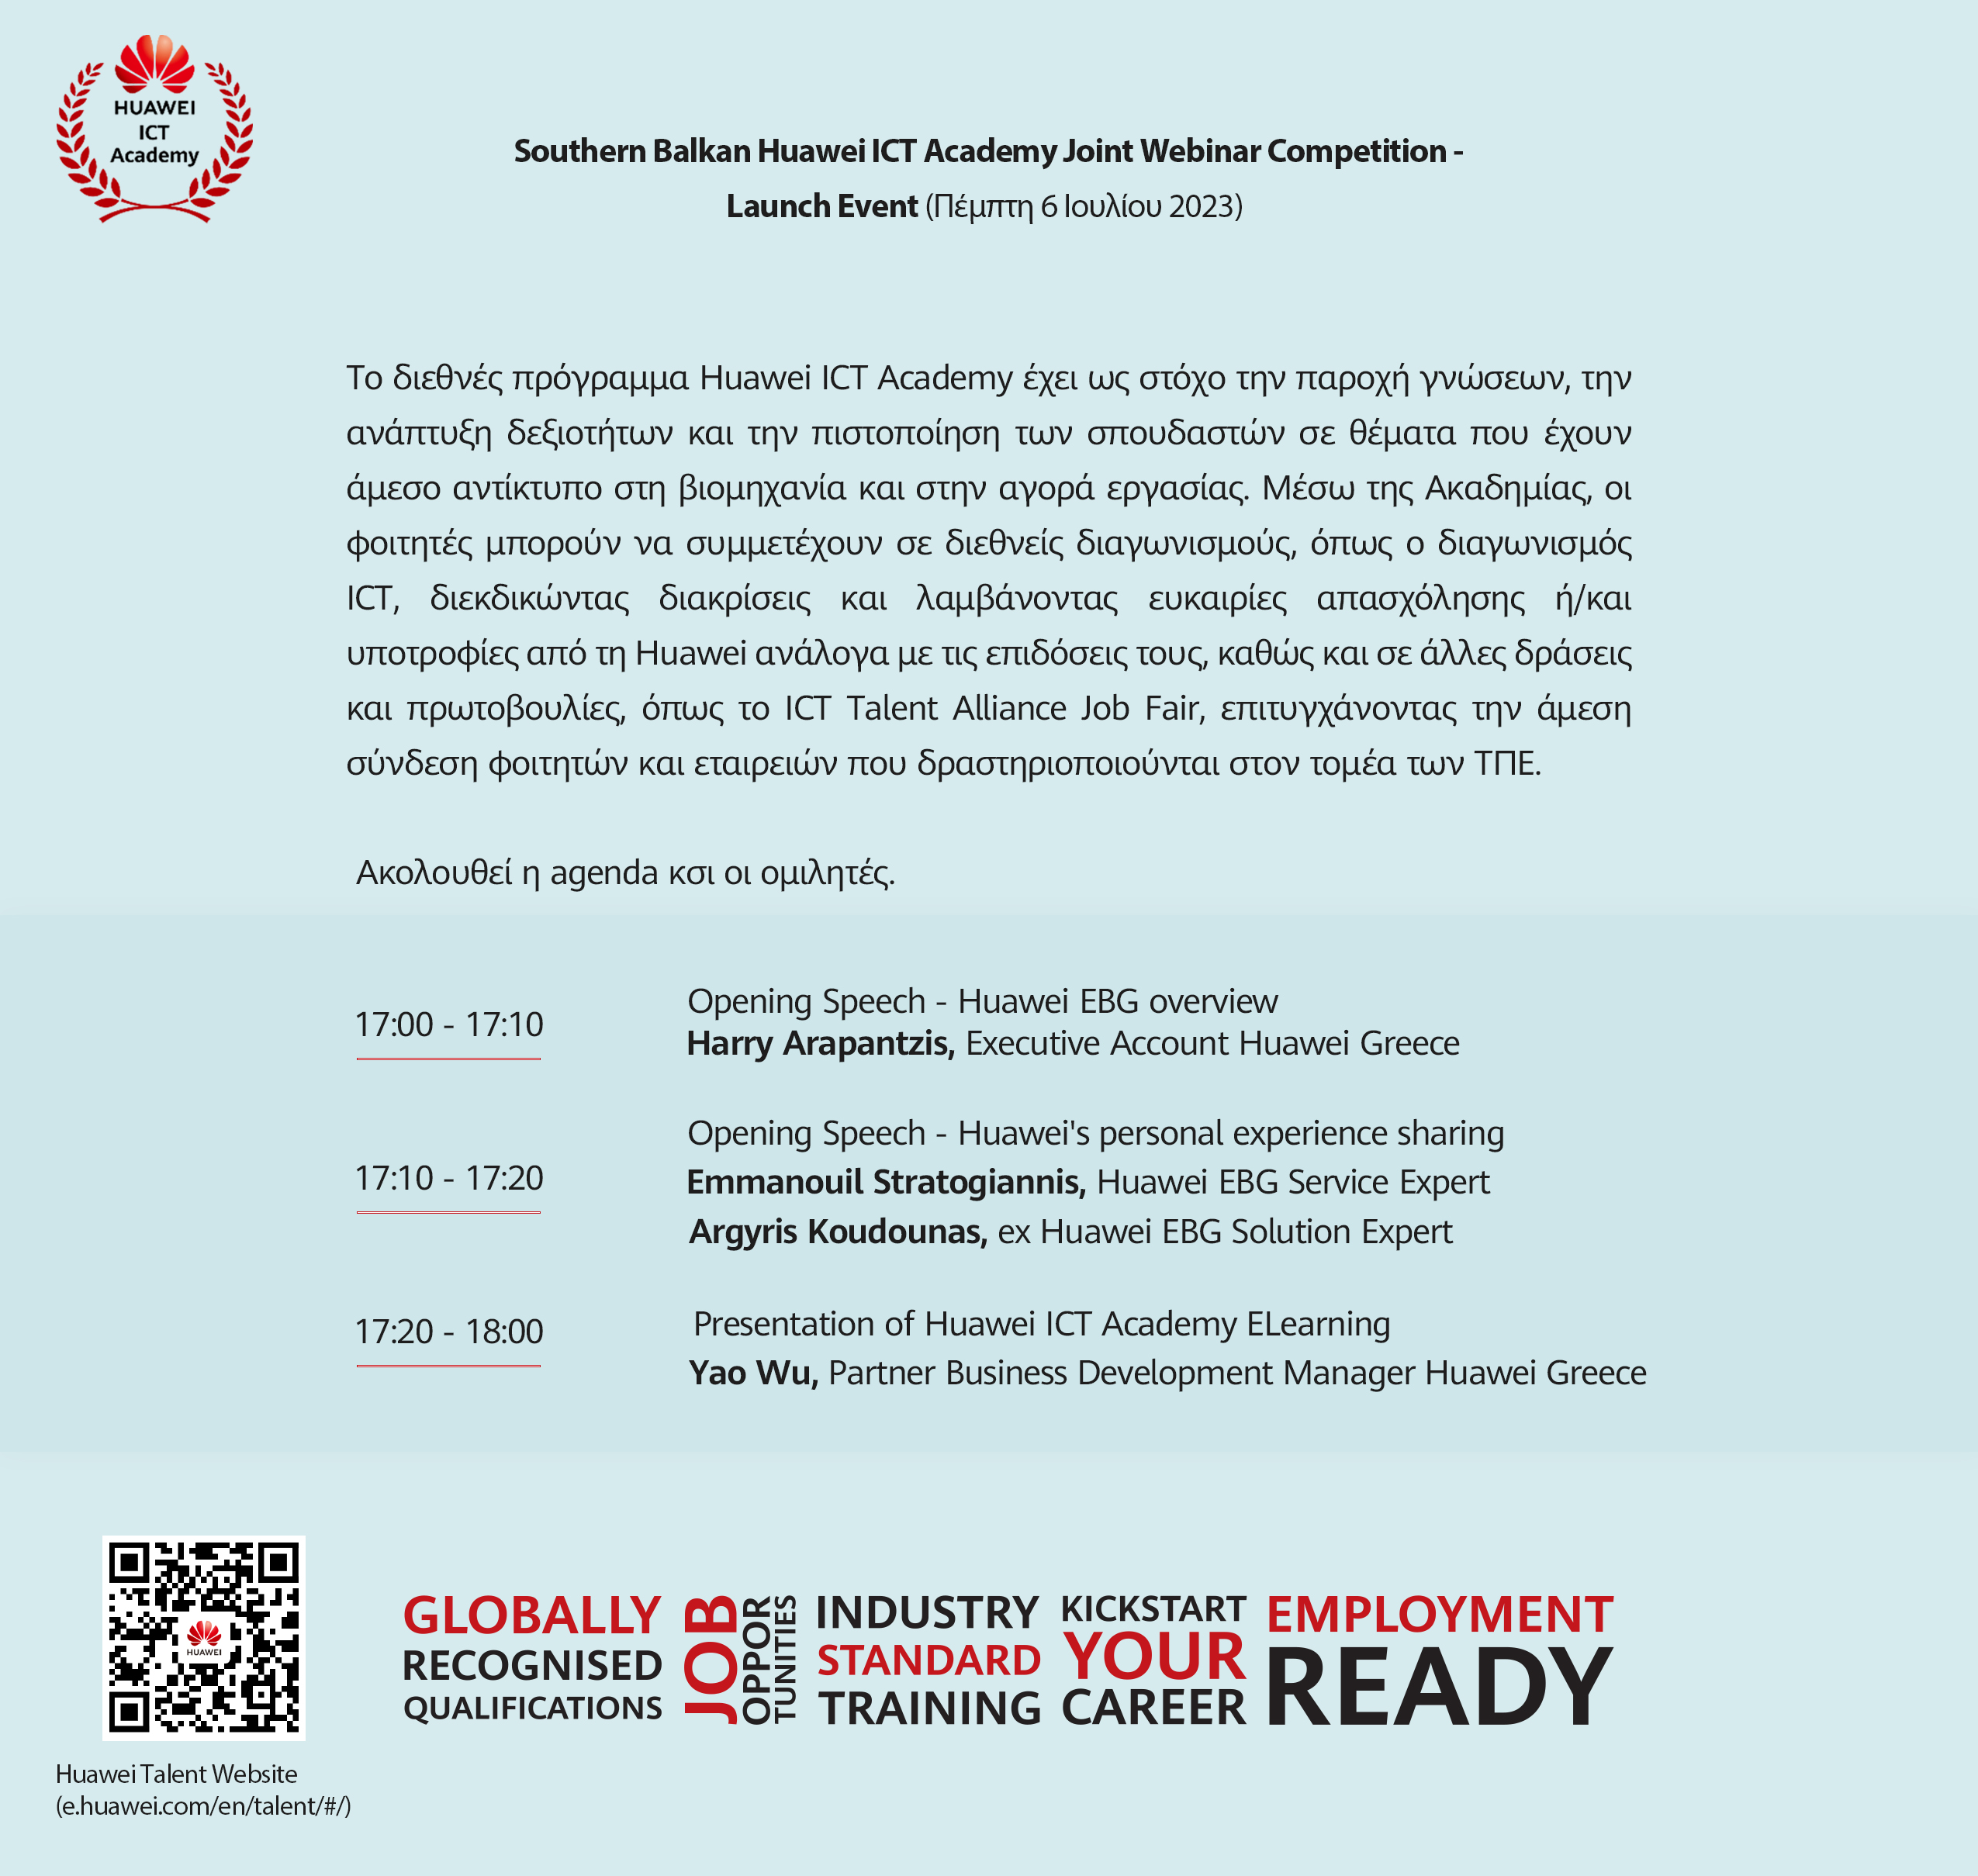 Southern Balkan Huawei ICT Academy Competition – Online Launch Event (Πέμπτη 6 Ιουλίου 2023, 17:00-18:00)